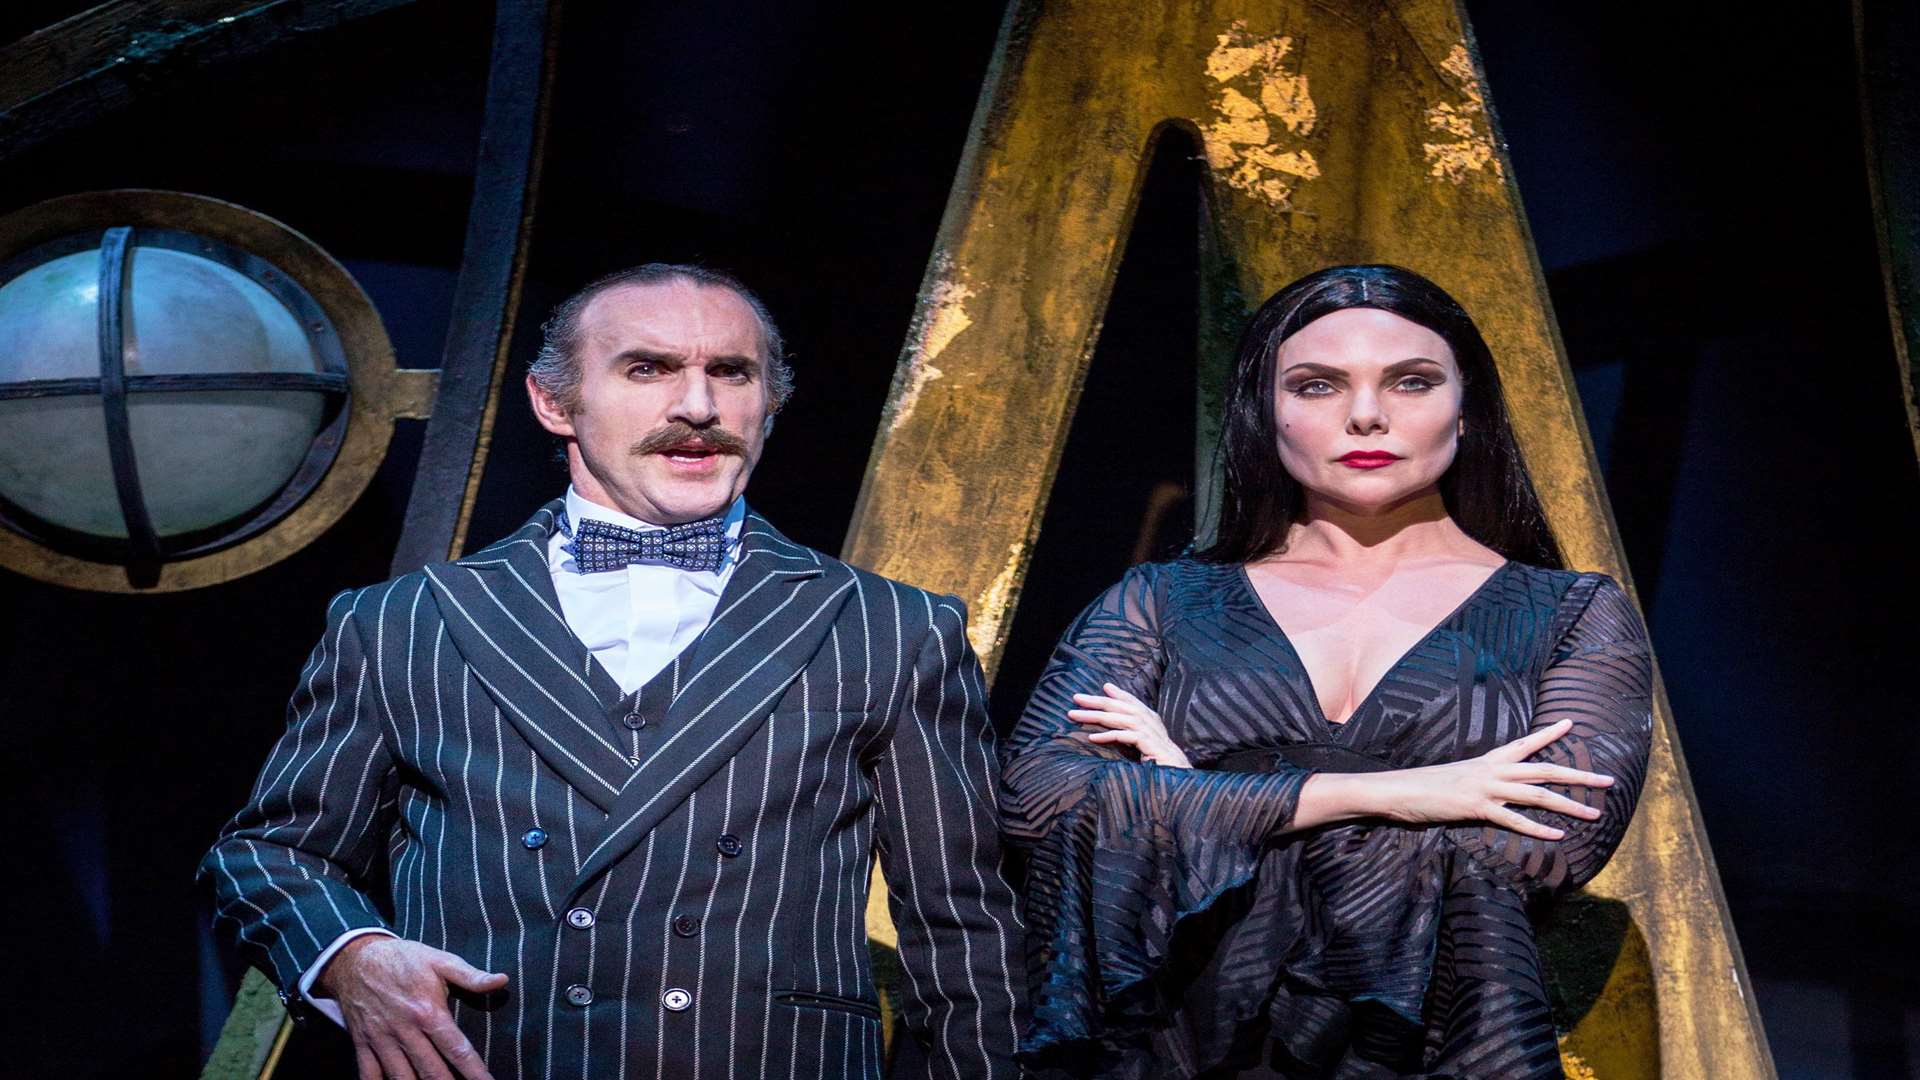 Cameron Blakeley as Gomez and Samantha Womack as Morticia in The Addams Family